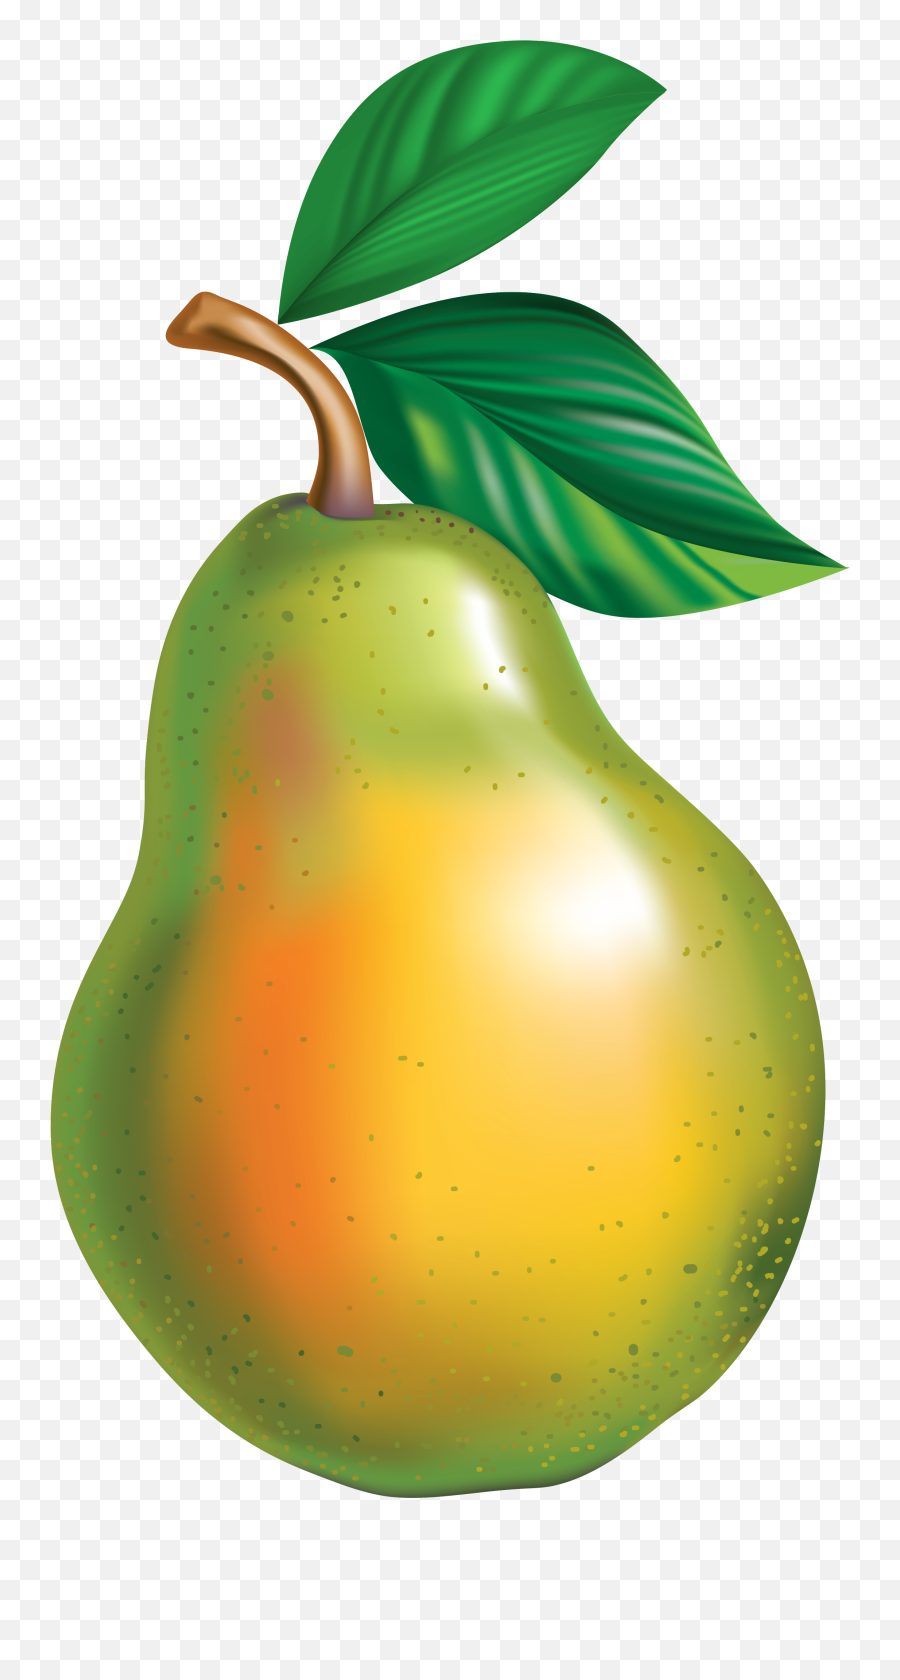 Transparent Background Pear Clipart Png - Clipart Pear,Fruit Transparent Background